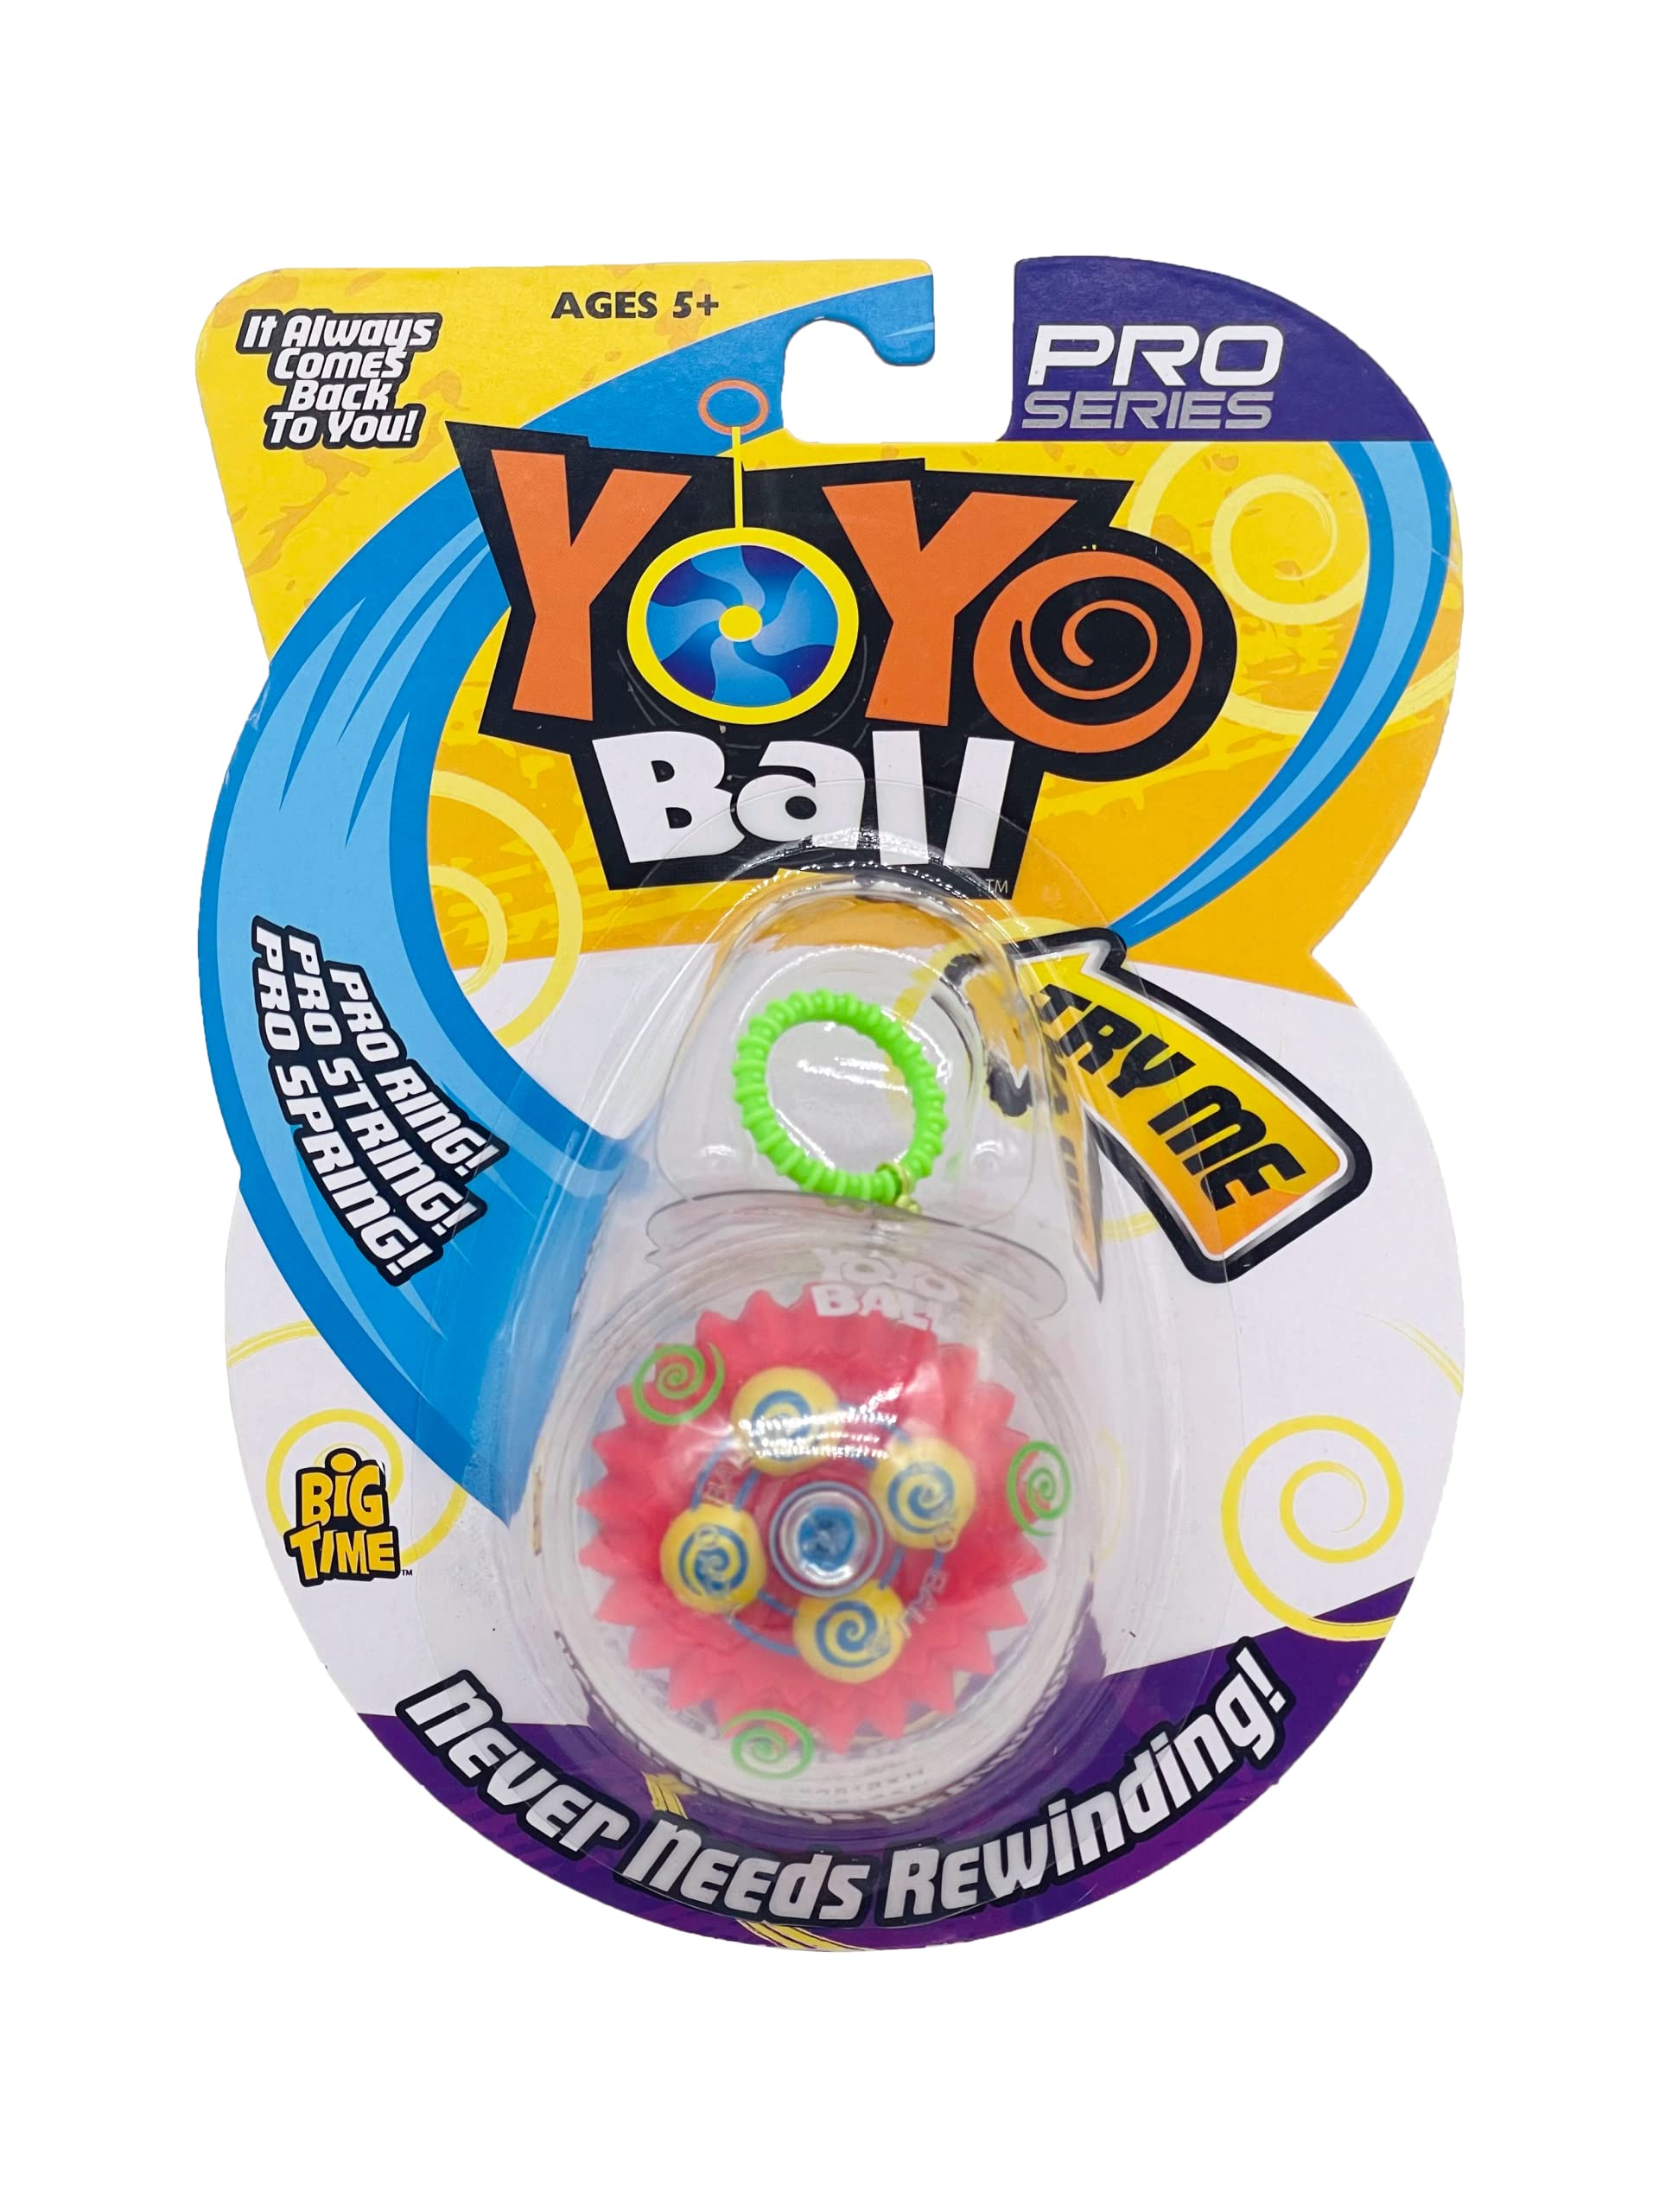 YoYo Ball Party Pack of 5, As seen on TV, Assorted Colors and Patterns, Automatically Returns to You - Never Needs rewinding, Instructions Included - Learn to Create Tricks